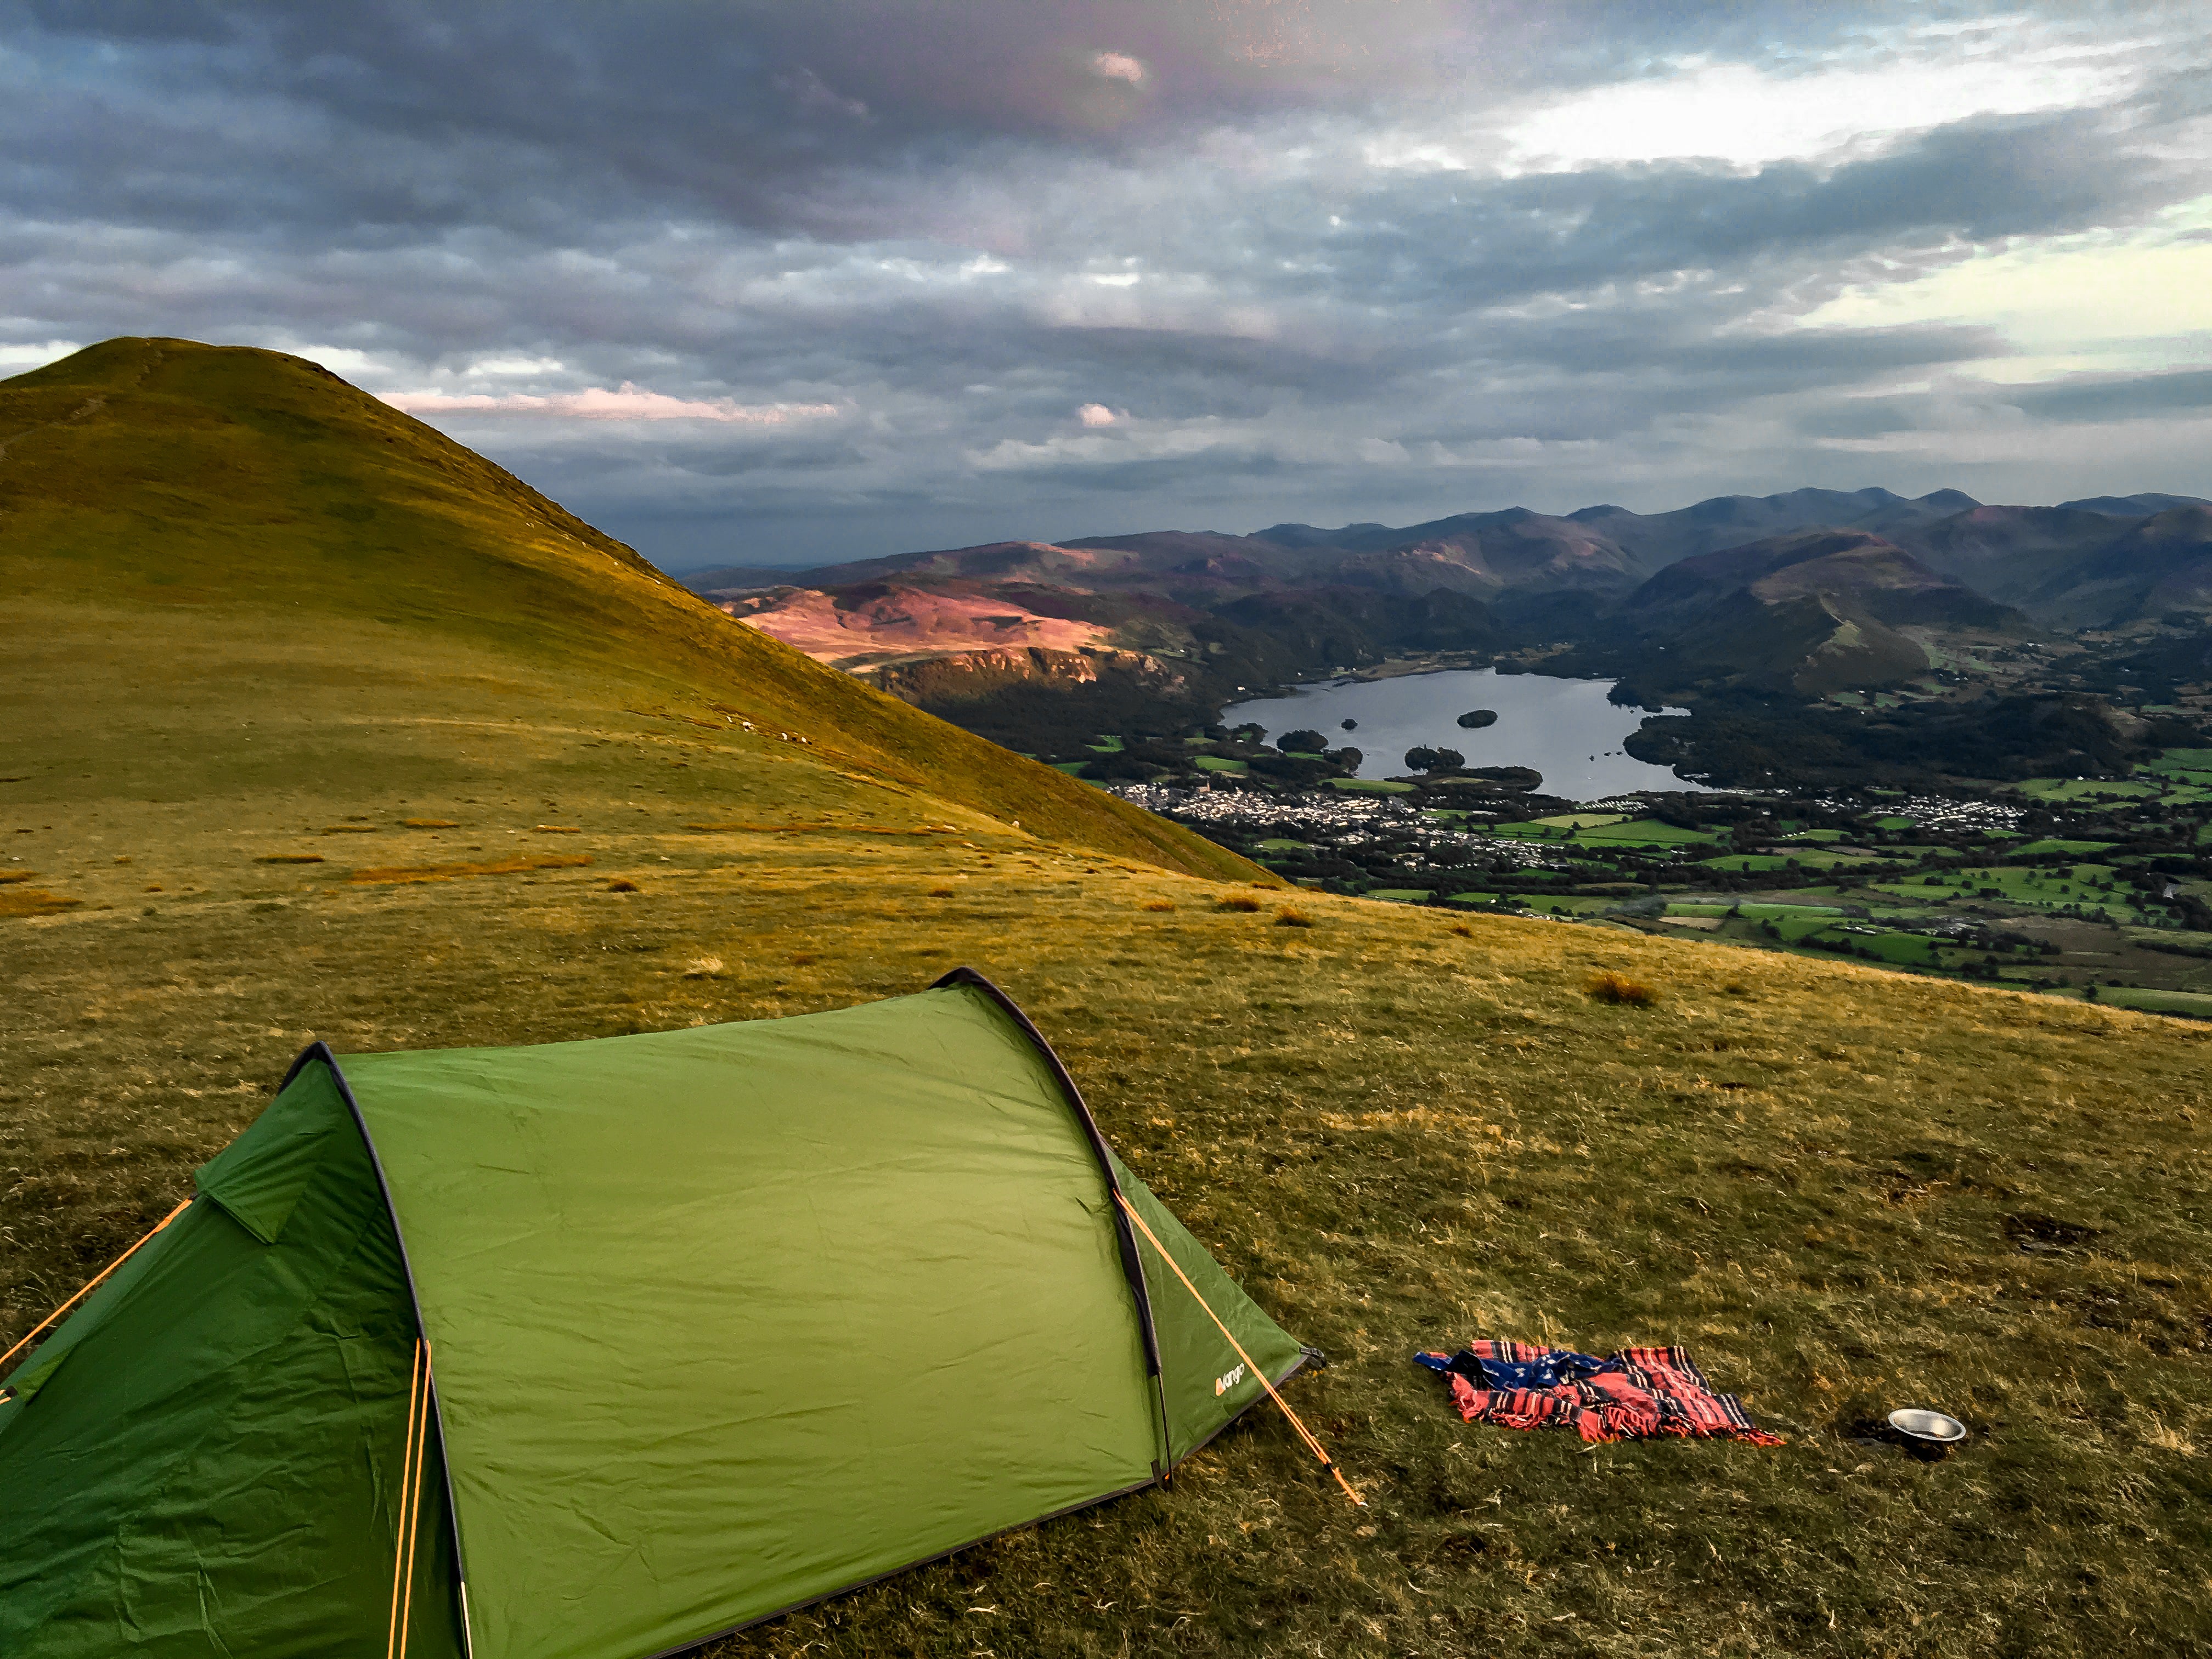 Wild camping in the UK; is it legal and other things you need to consider before finding the perfect place to pitch your tent in nature.